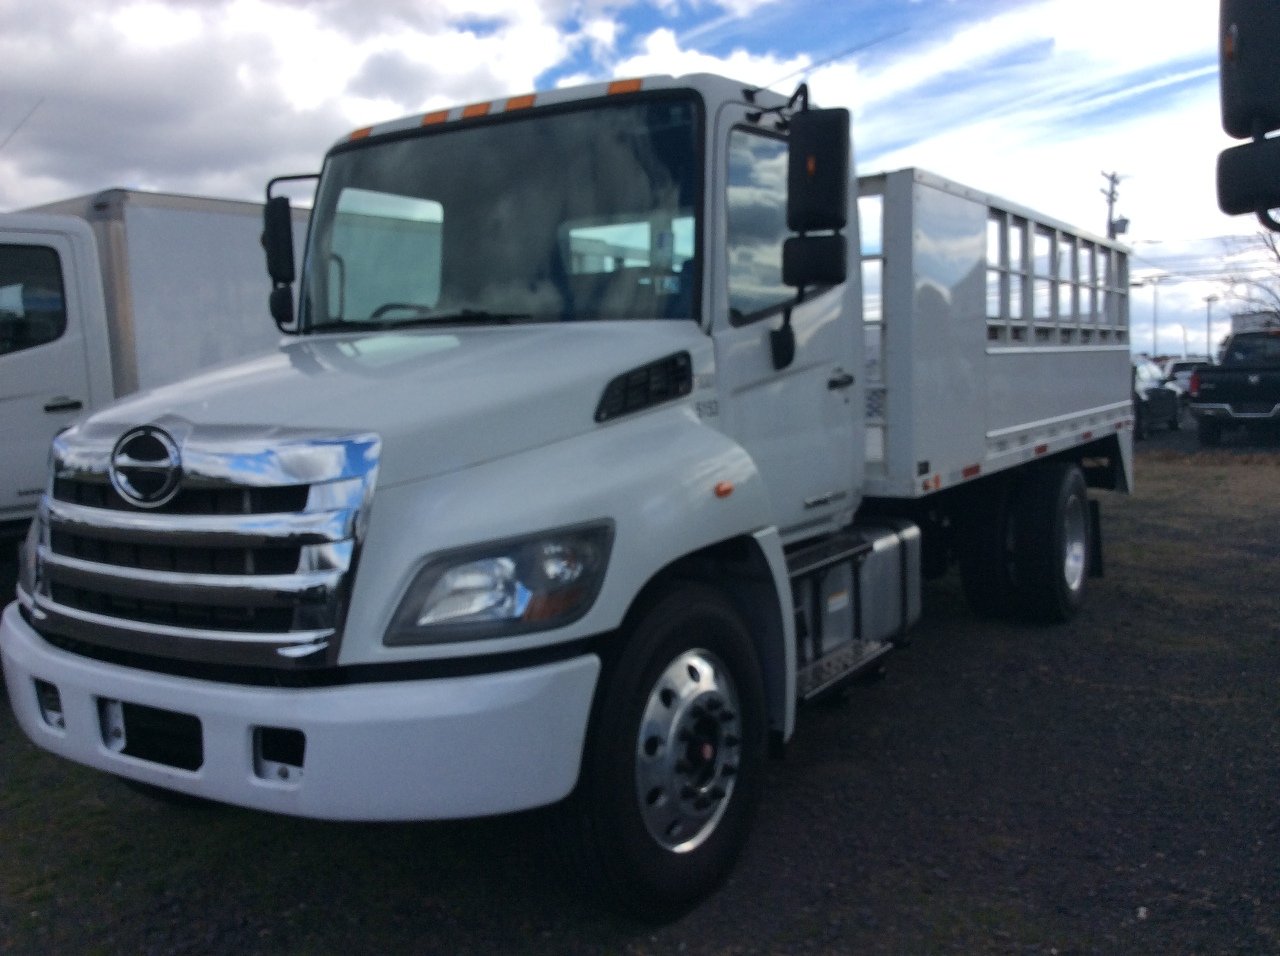 Used Truck Inventory - 1001857 01 2 - 80